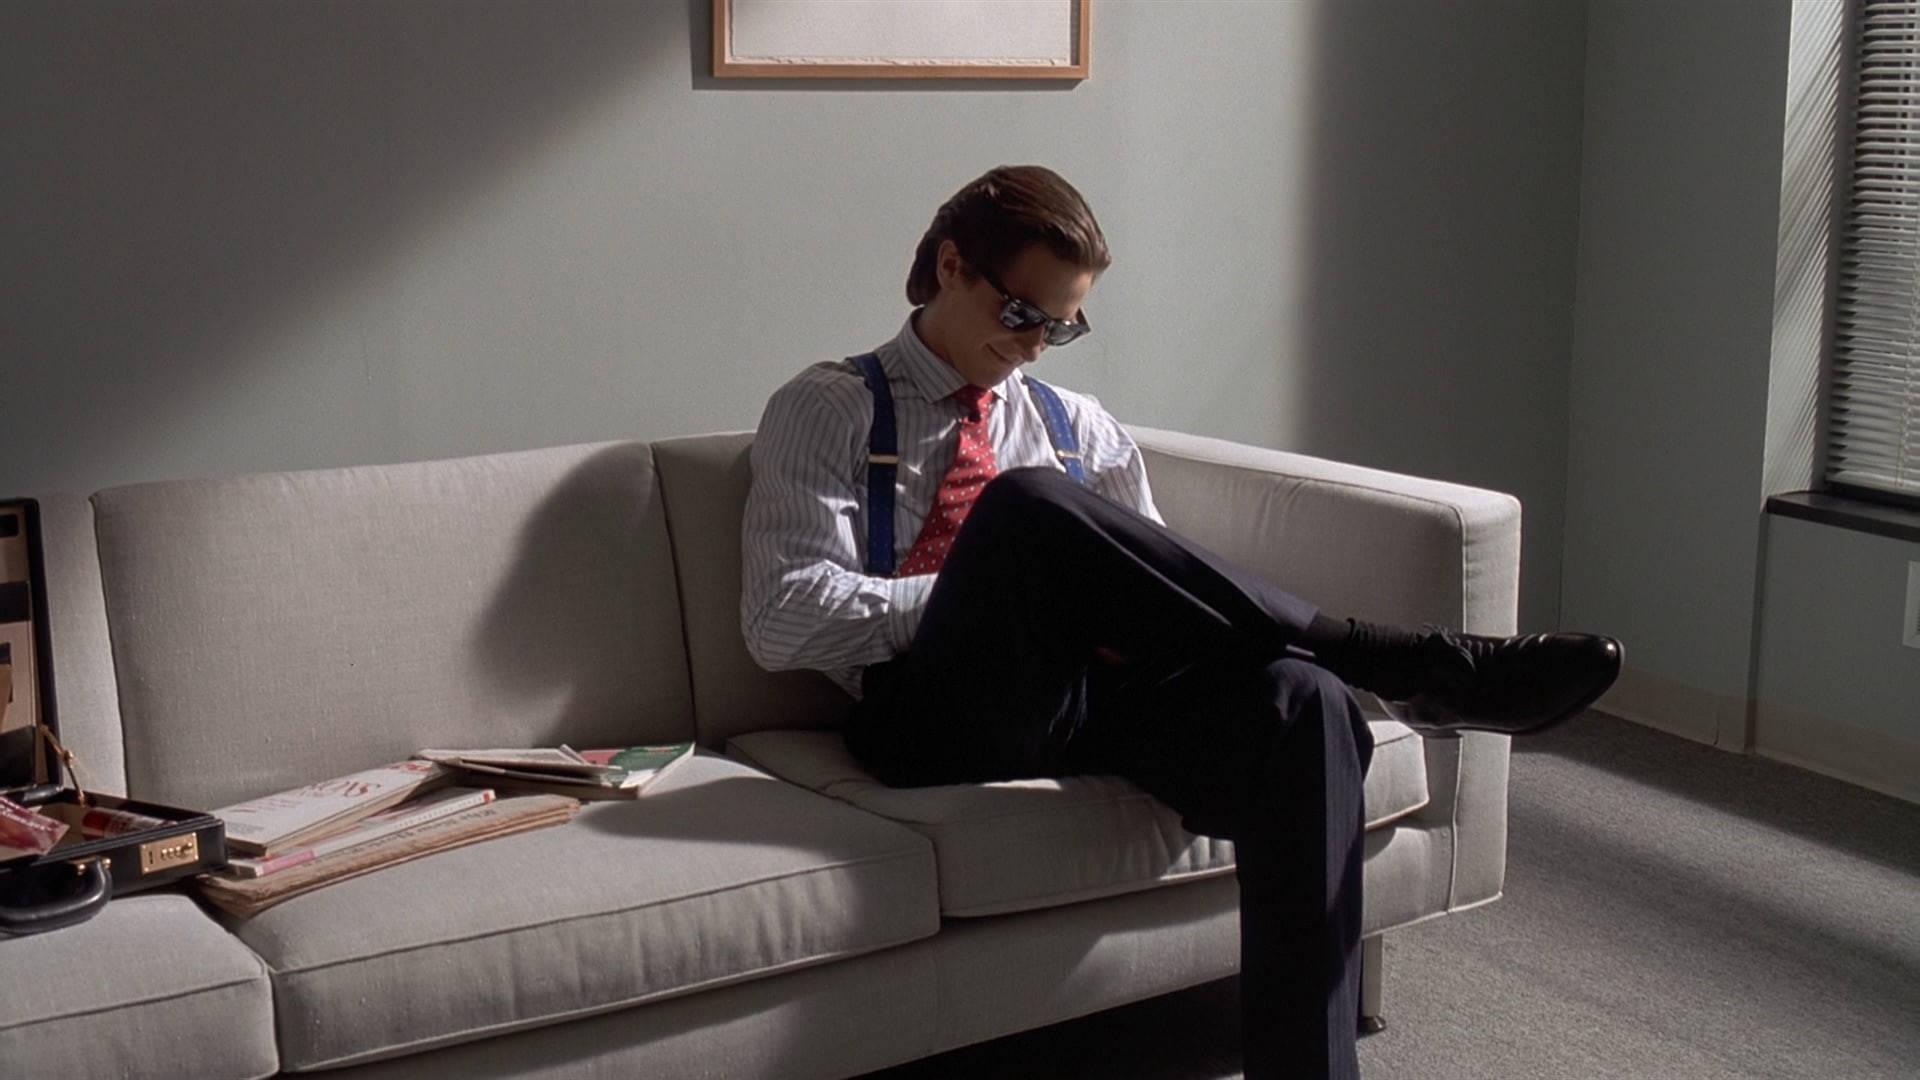 American Psycho's' Depiction of Masculinity